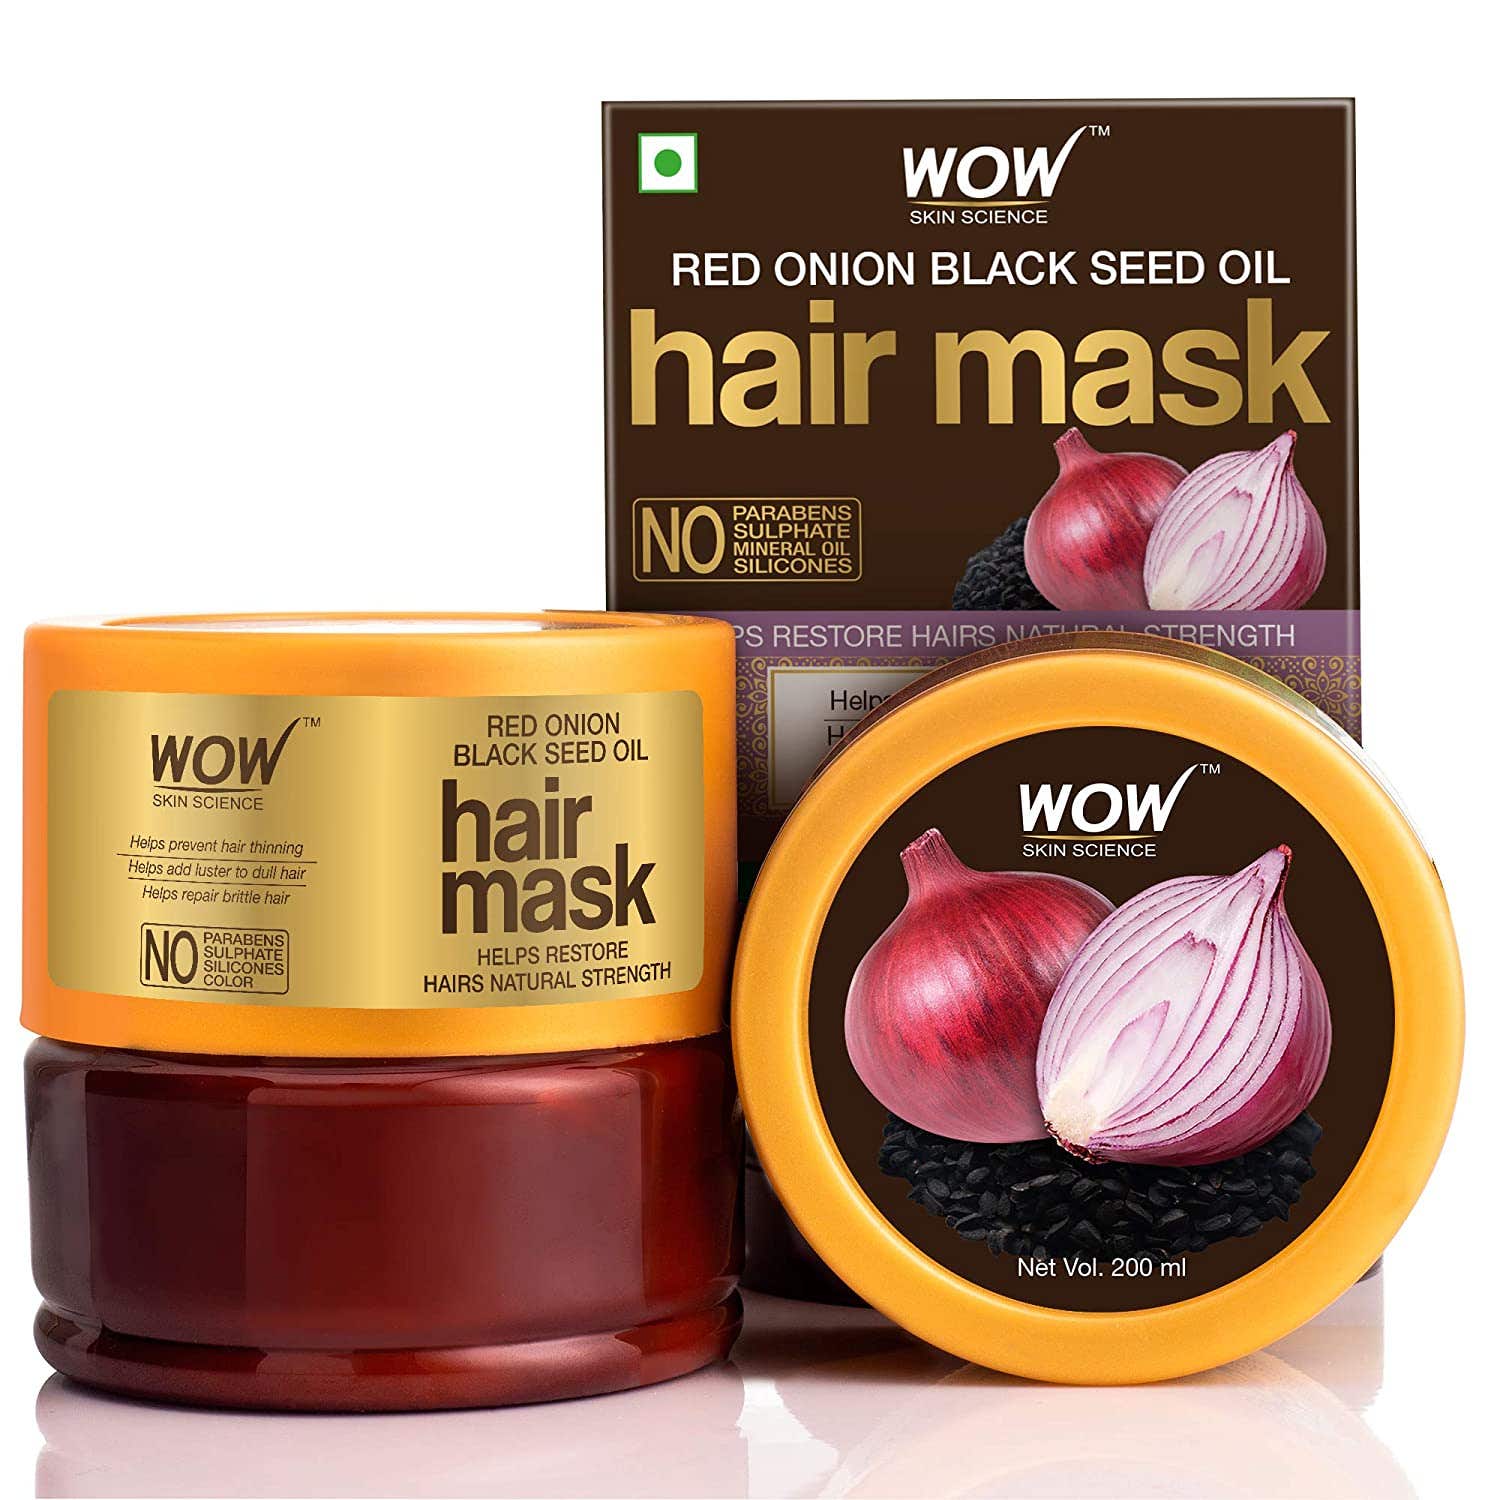 Wow Red On Blk Seed Oil Hair Mask 200Ml